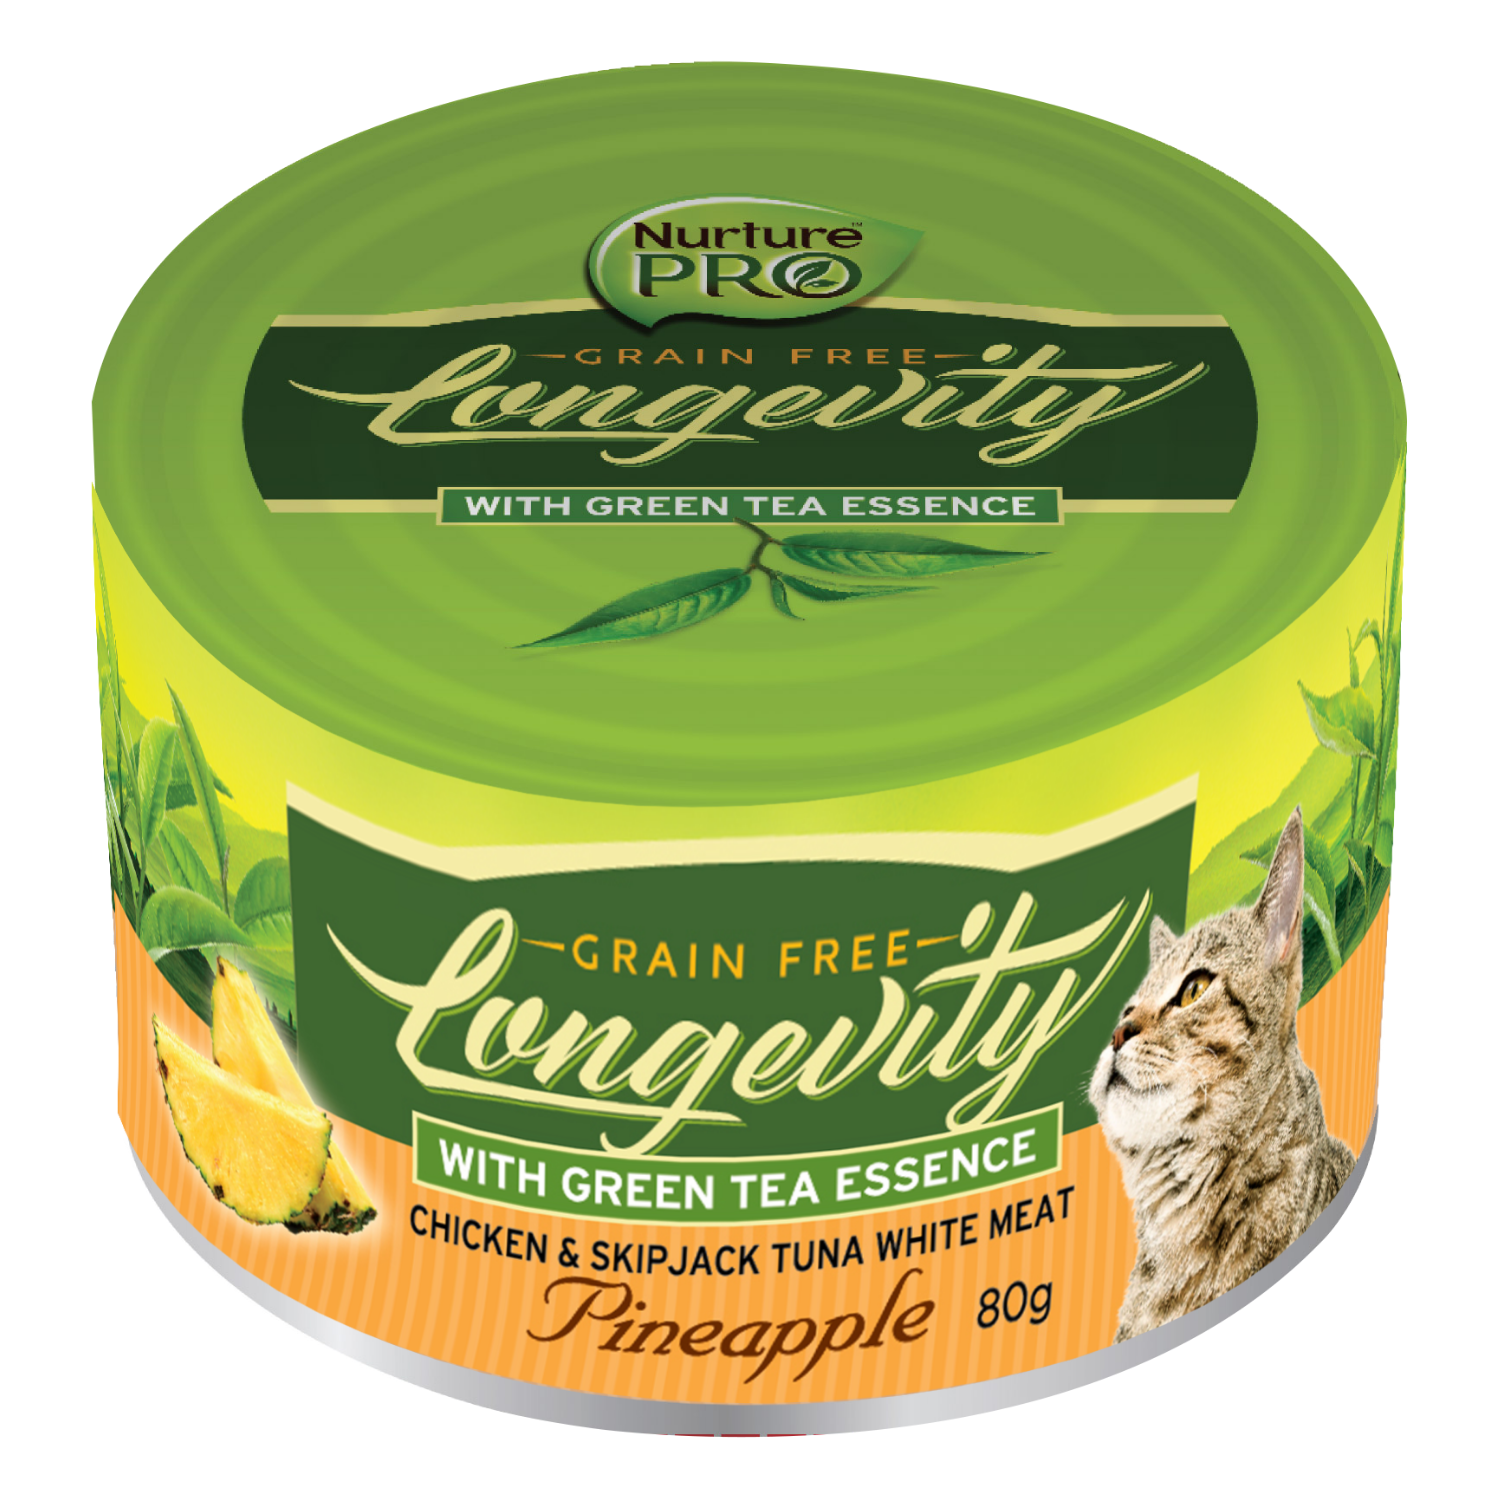 Nurture Pro Longevity Chicken and Skipjack Tuna Meat with (Pineapple and Green Tea) Essence - 12 / 24 Cans